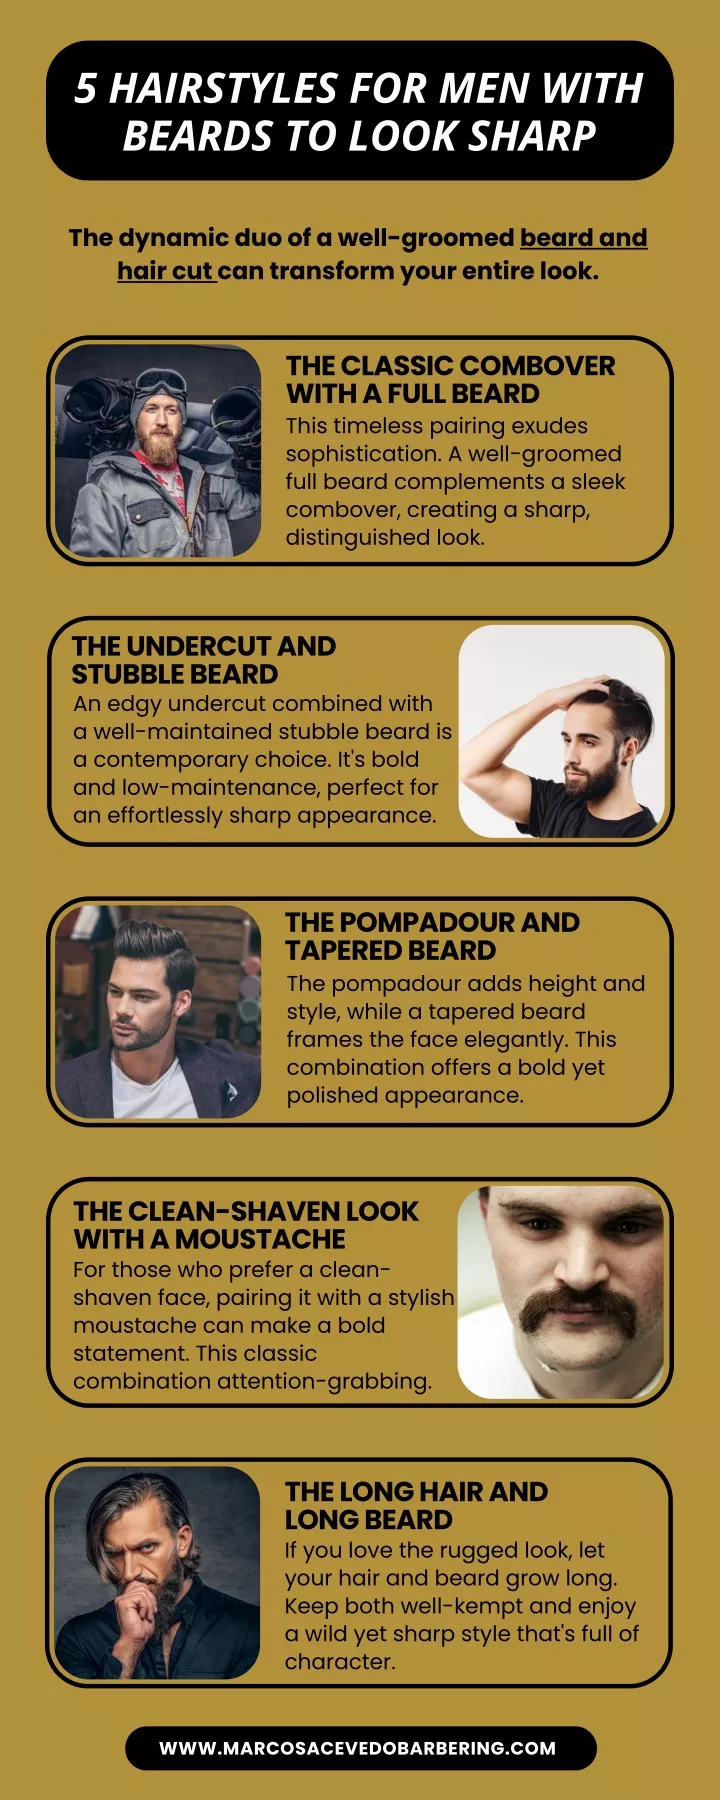 5 hairstyles for men with beards to look sharp